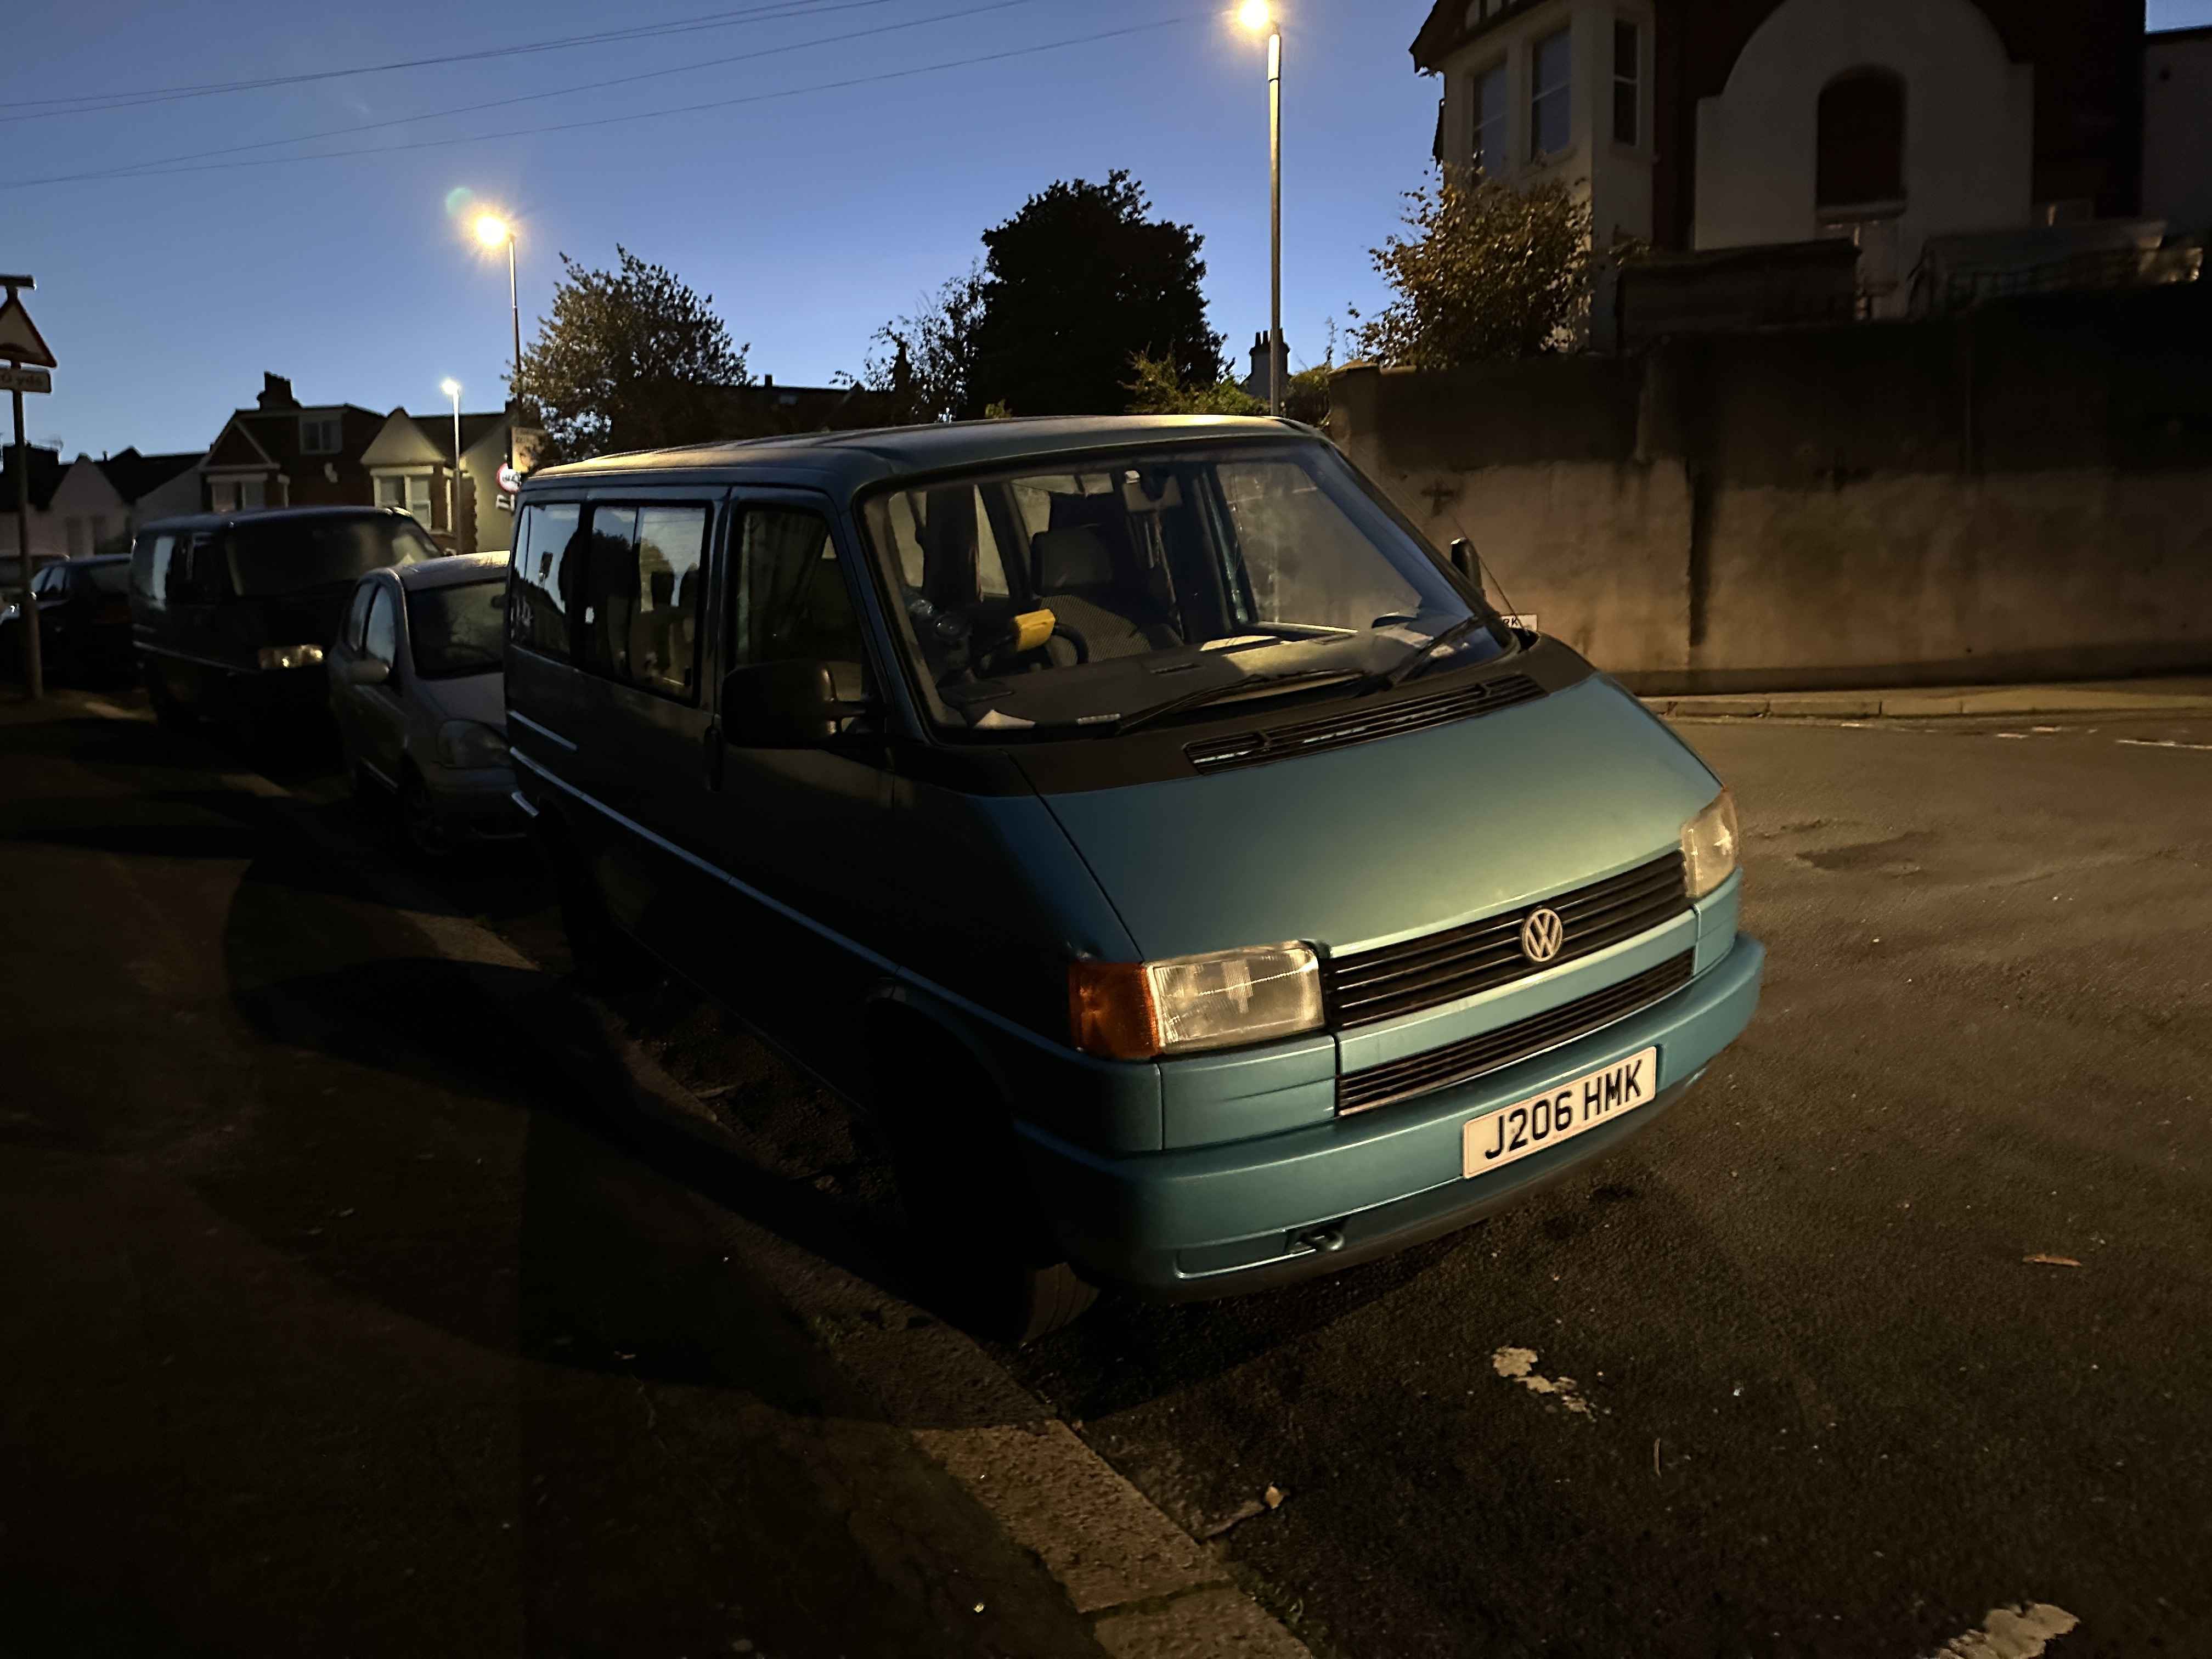 Photograph of J206 HMK - a Blue Volkswagen Transporter camper van parked in Hollingdean by a non-resident. The second of two photographs supplied by the residents of Hollingdean.